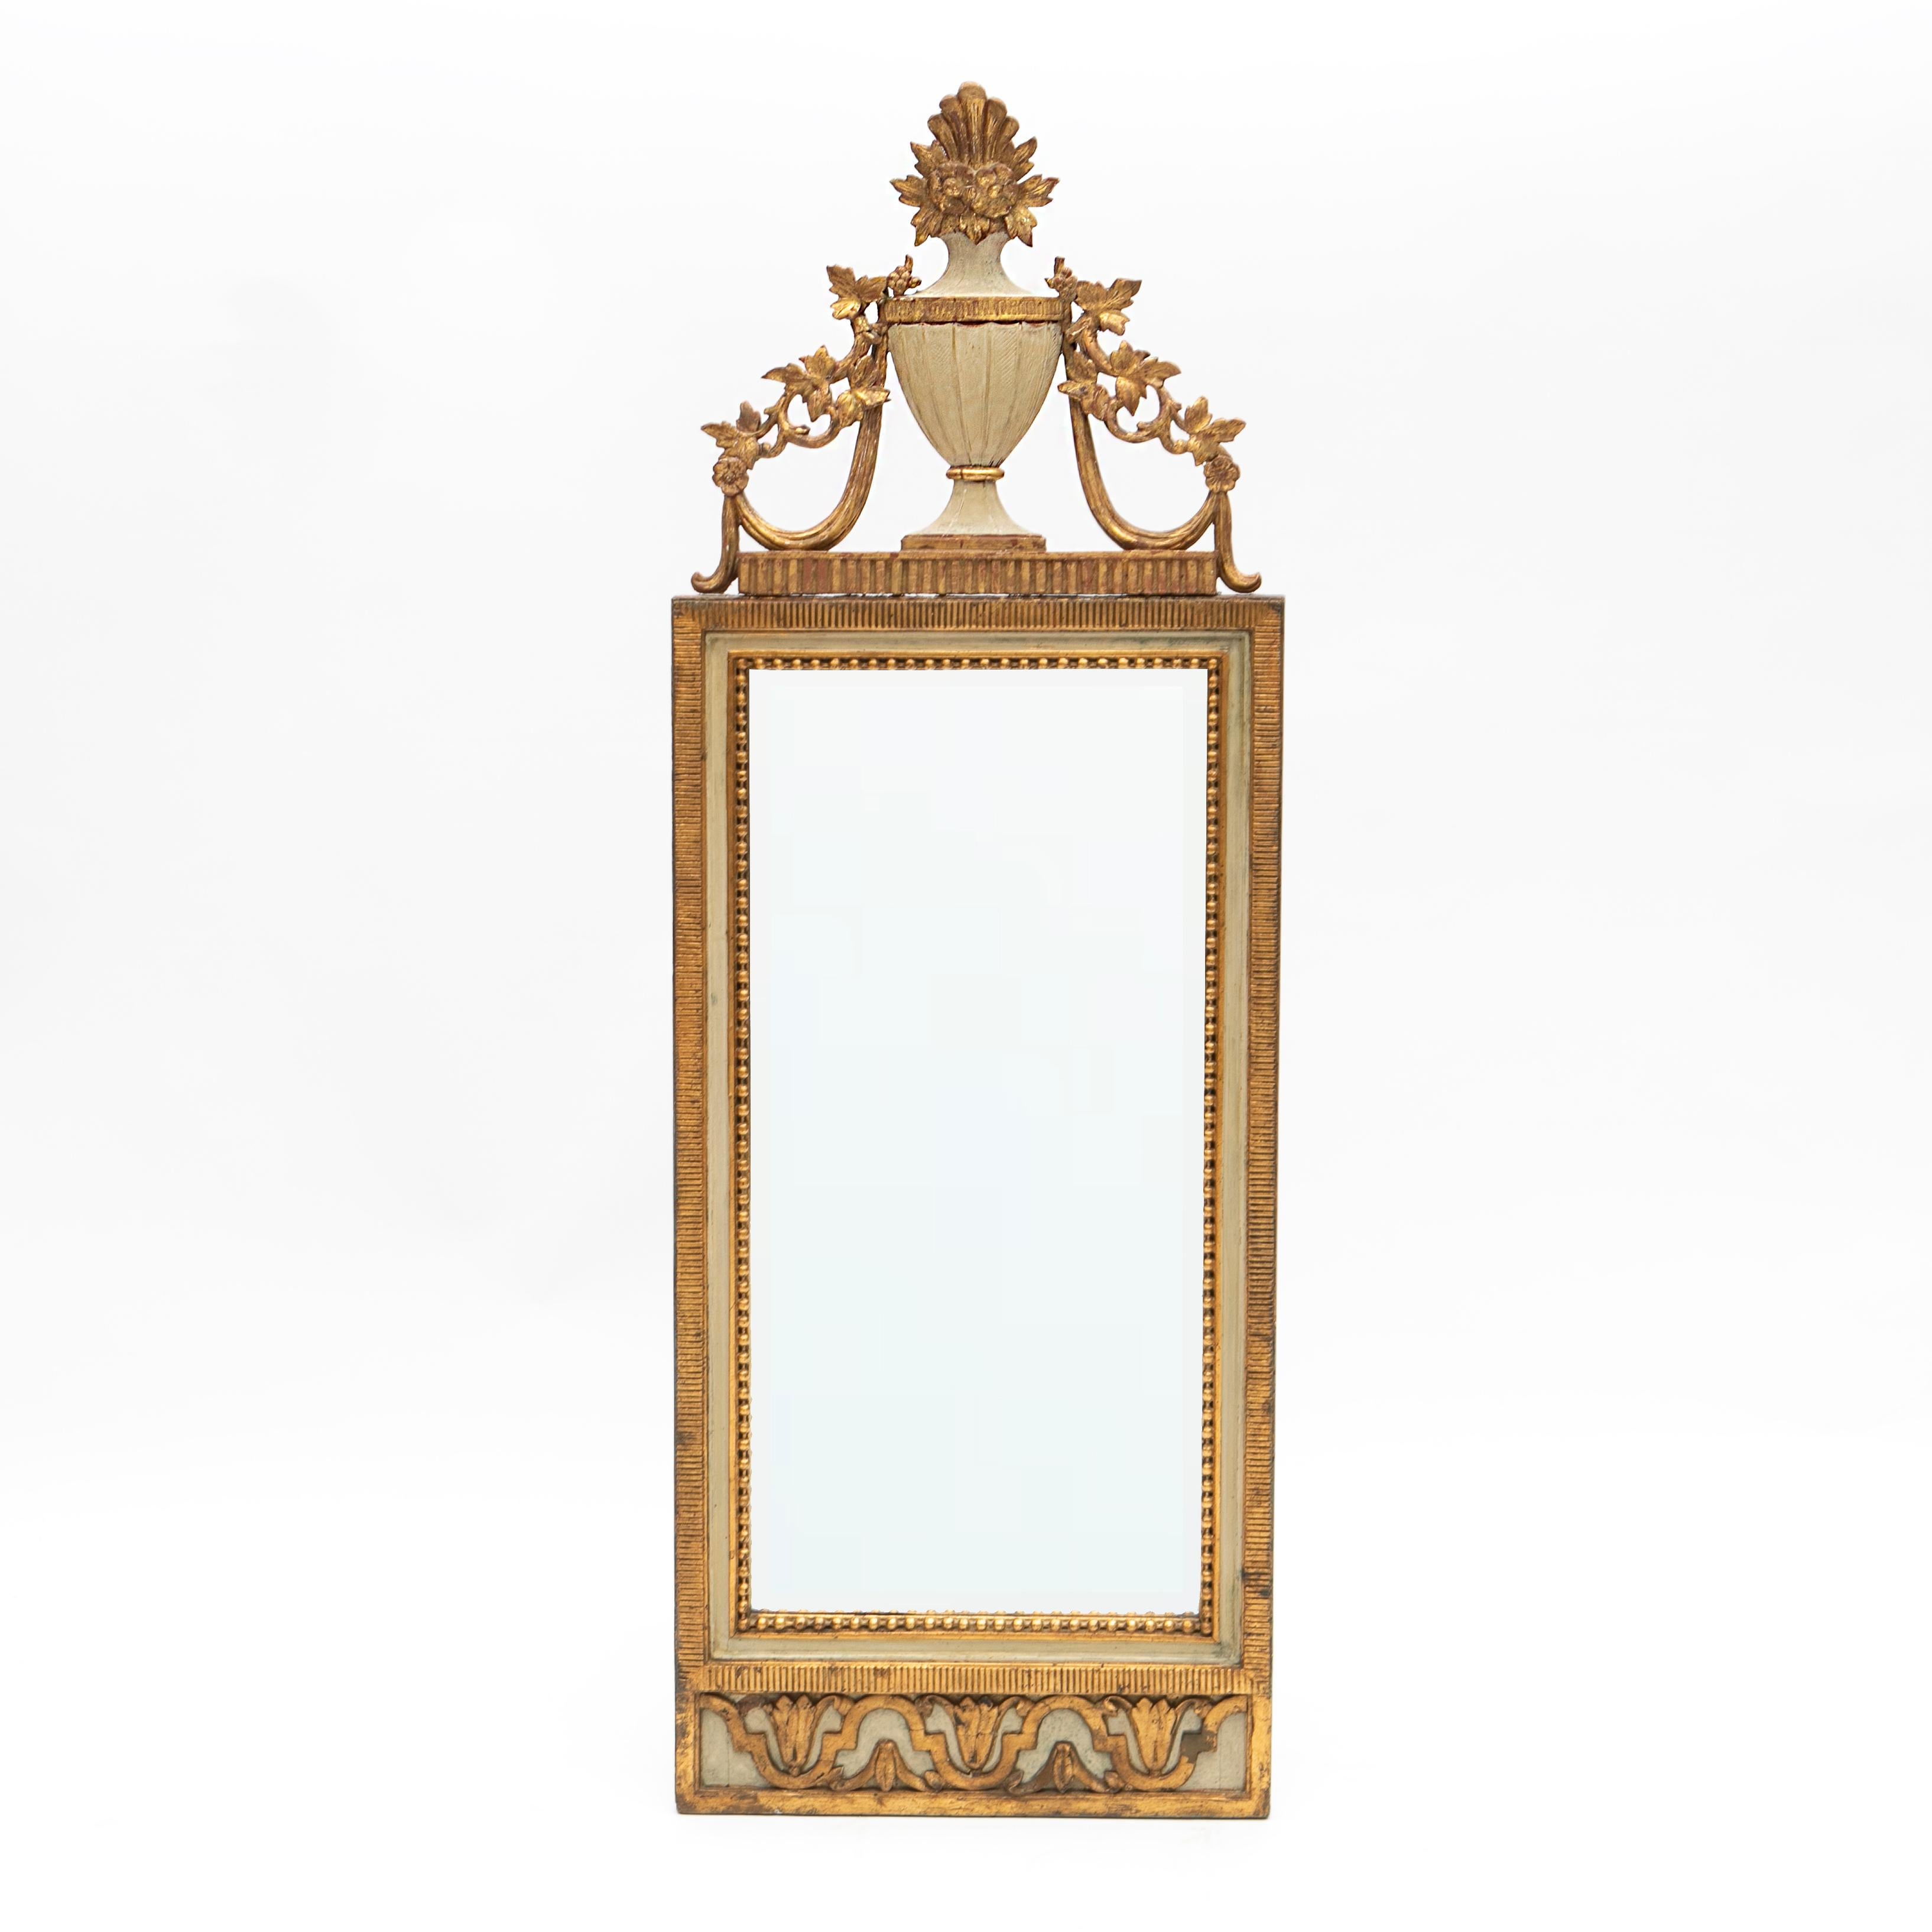 A Danish Louis XVI period carved giltwood wall mirror in original condition. 
Features a bevelled mirror in a light gray and gilt carved frame with flutings surrounded by a carved bead border. At the top a carved vase and foliage.

The light